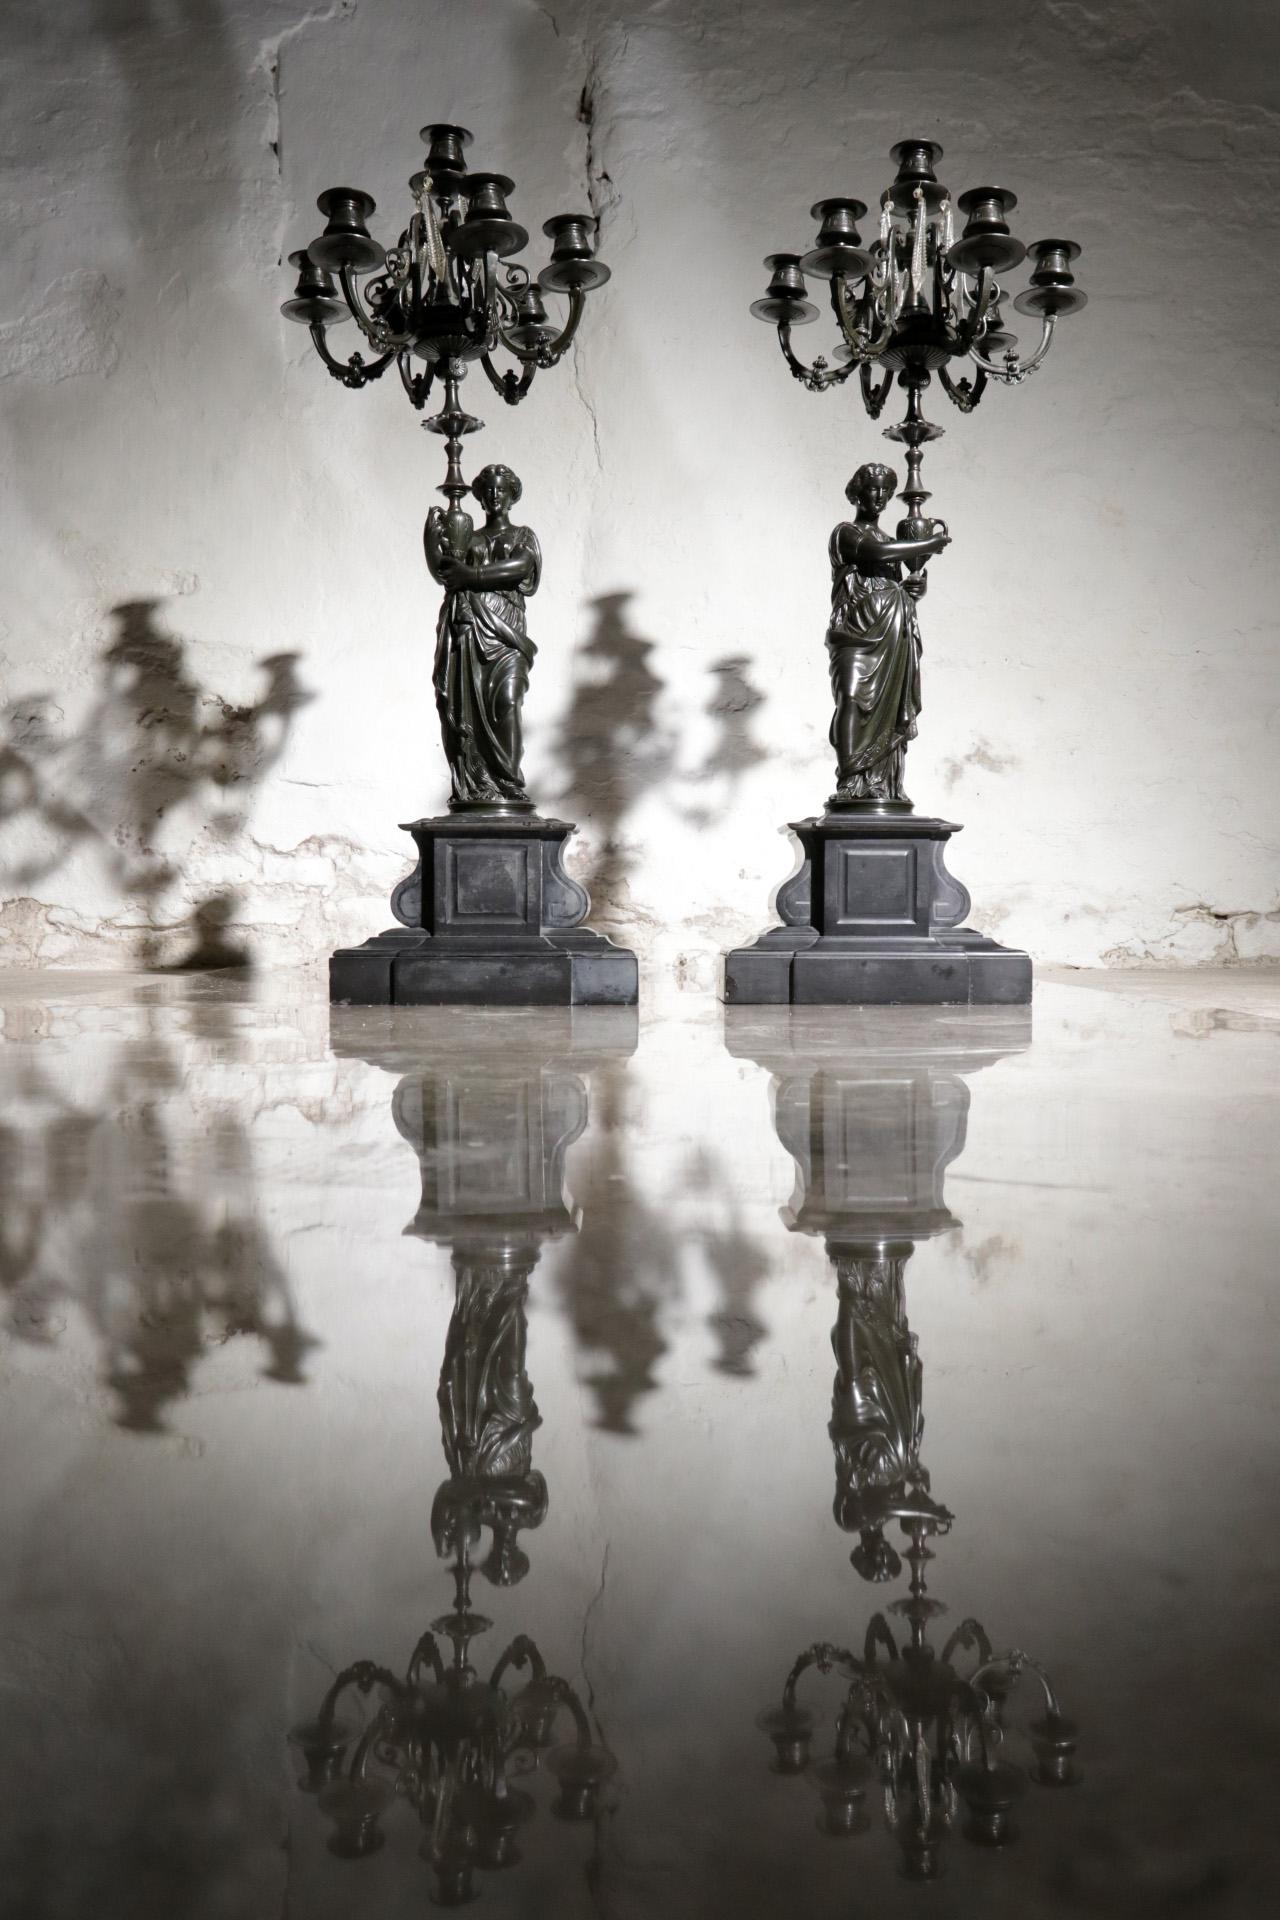 Very decorative, large (almost 80 cm high) pair of France candelabra from in the 19th century.
Made of patinated bronze and standing on a marble base.
Very detailed figures. Some crystals hang in the candlesticks that provide the sparkle when the